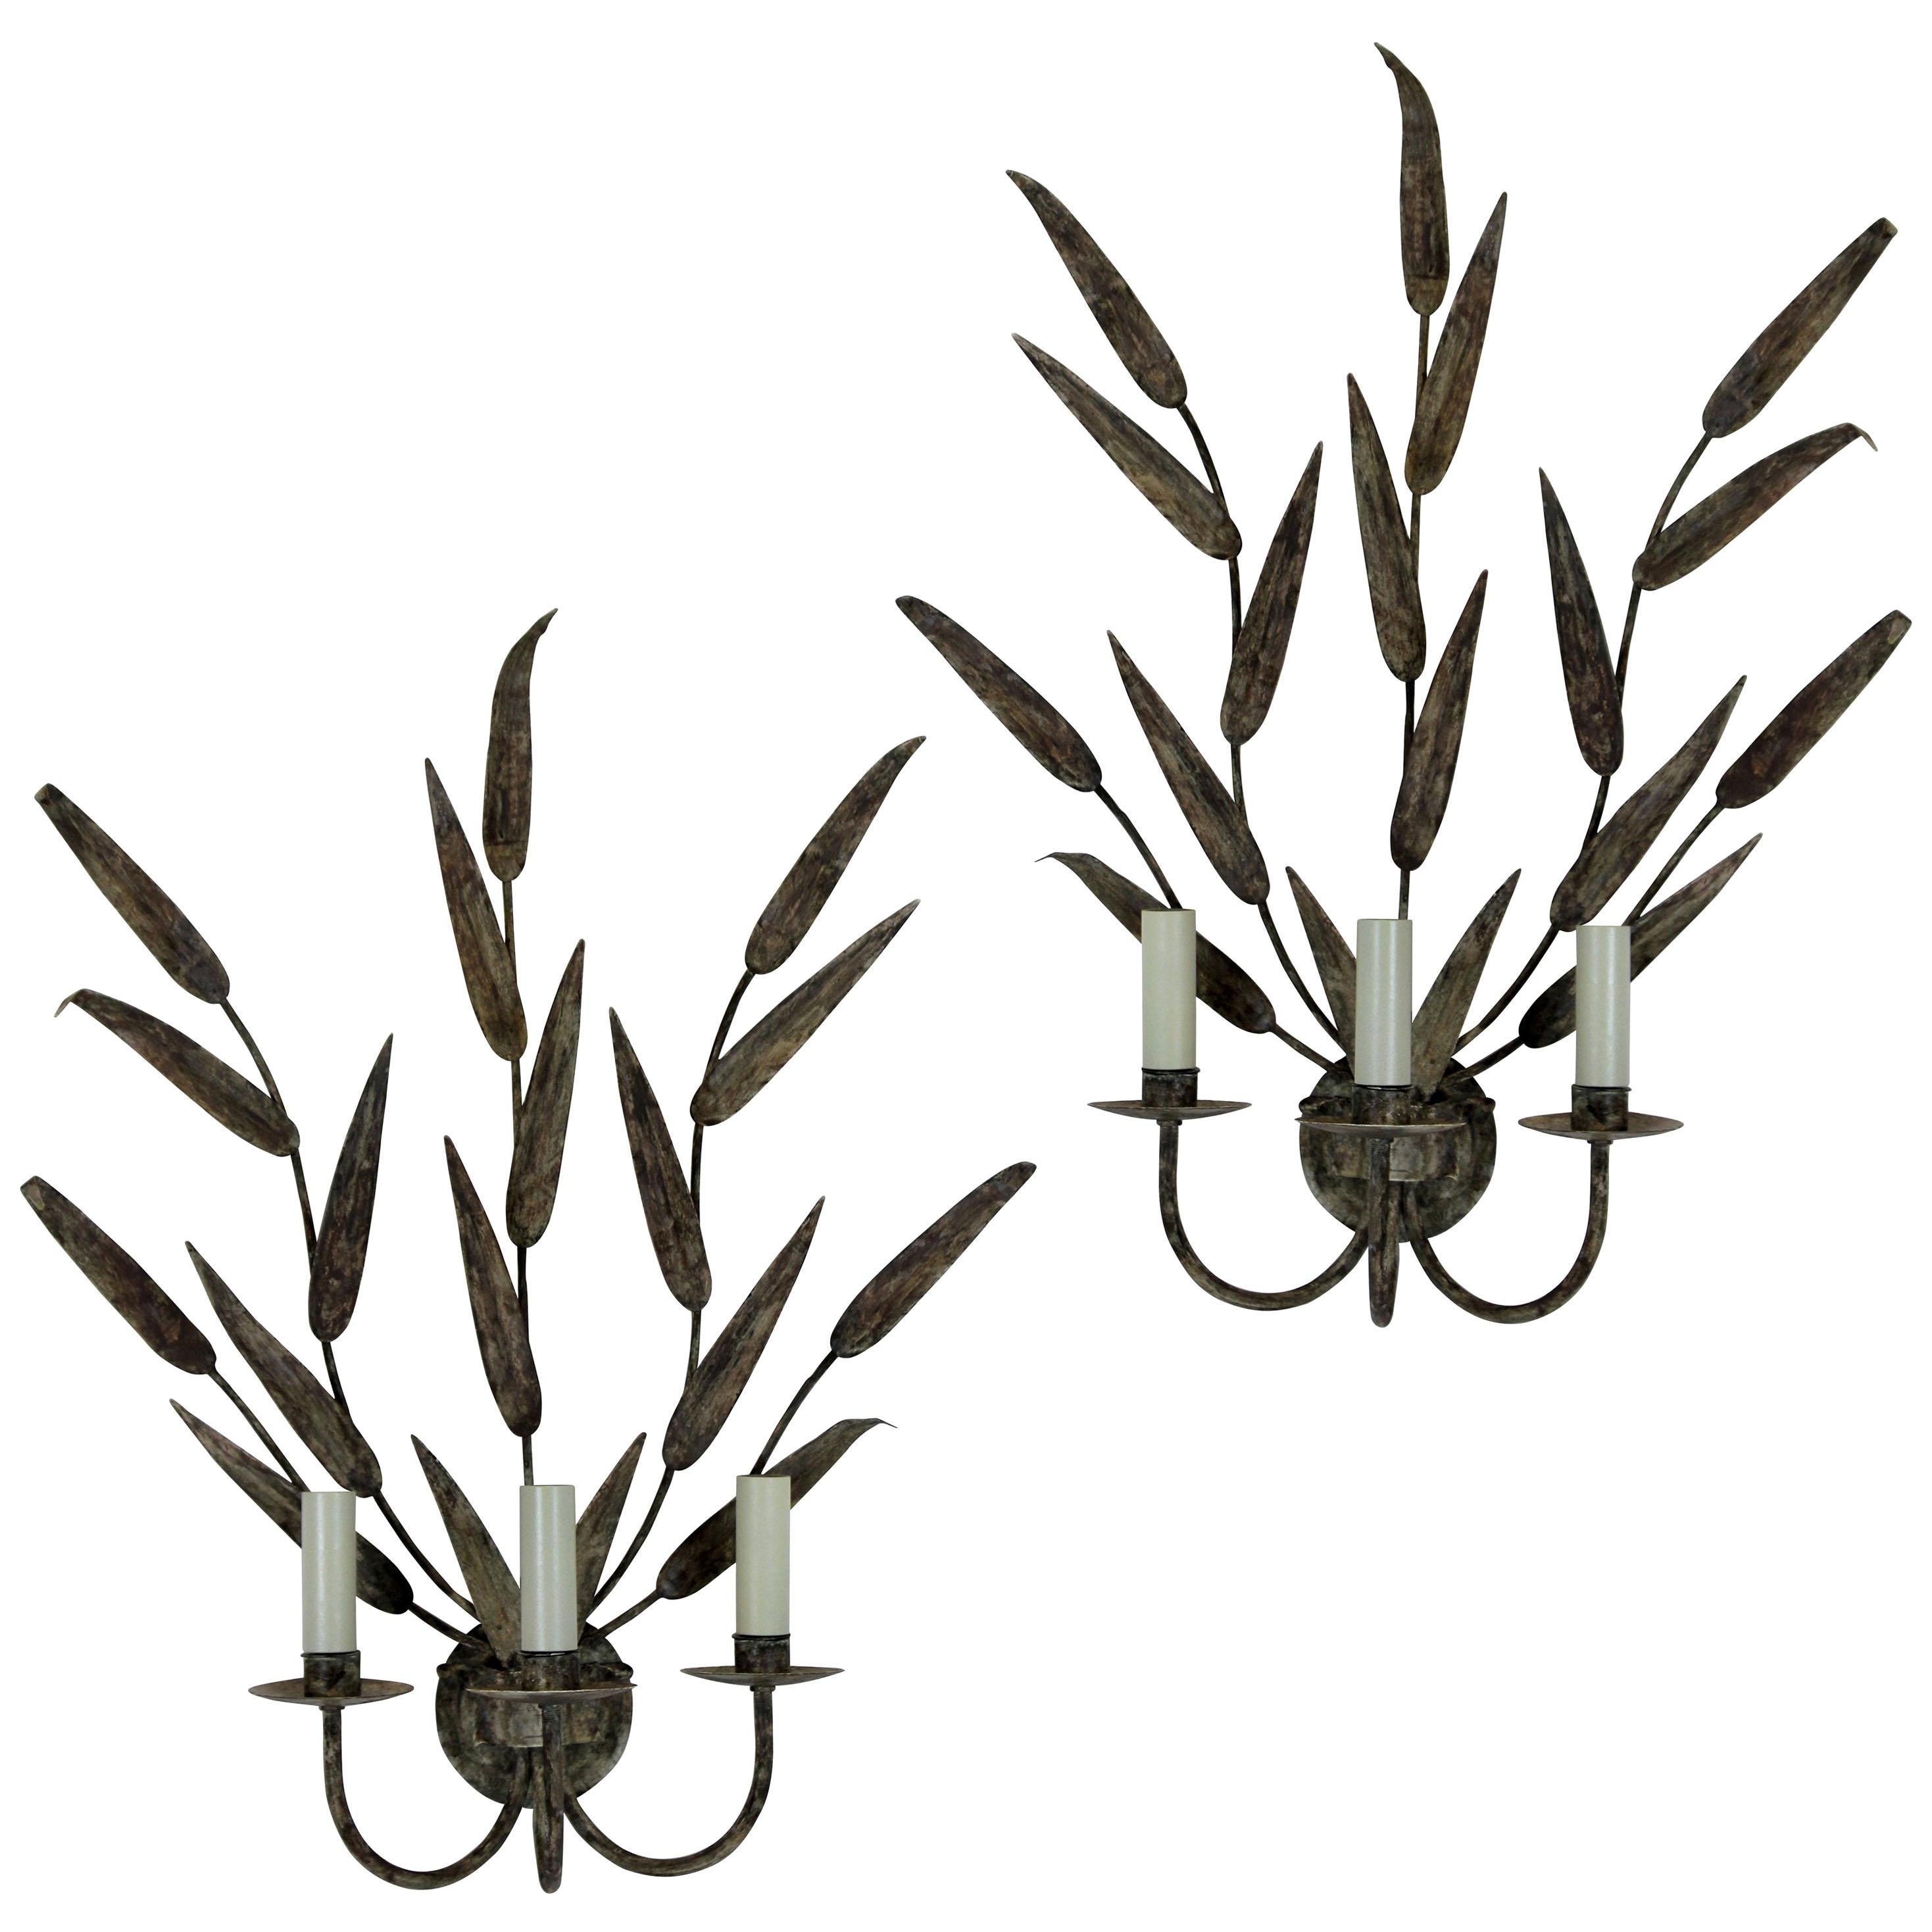 Pair of Large Tole Leafy Wall Sconces